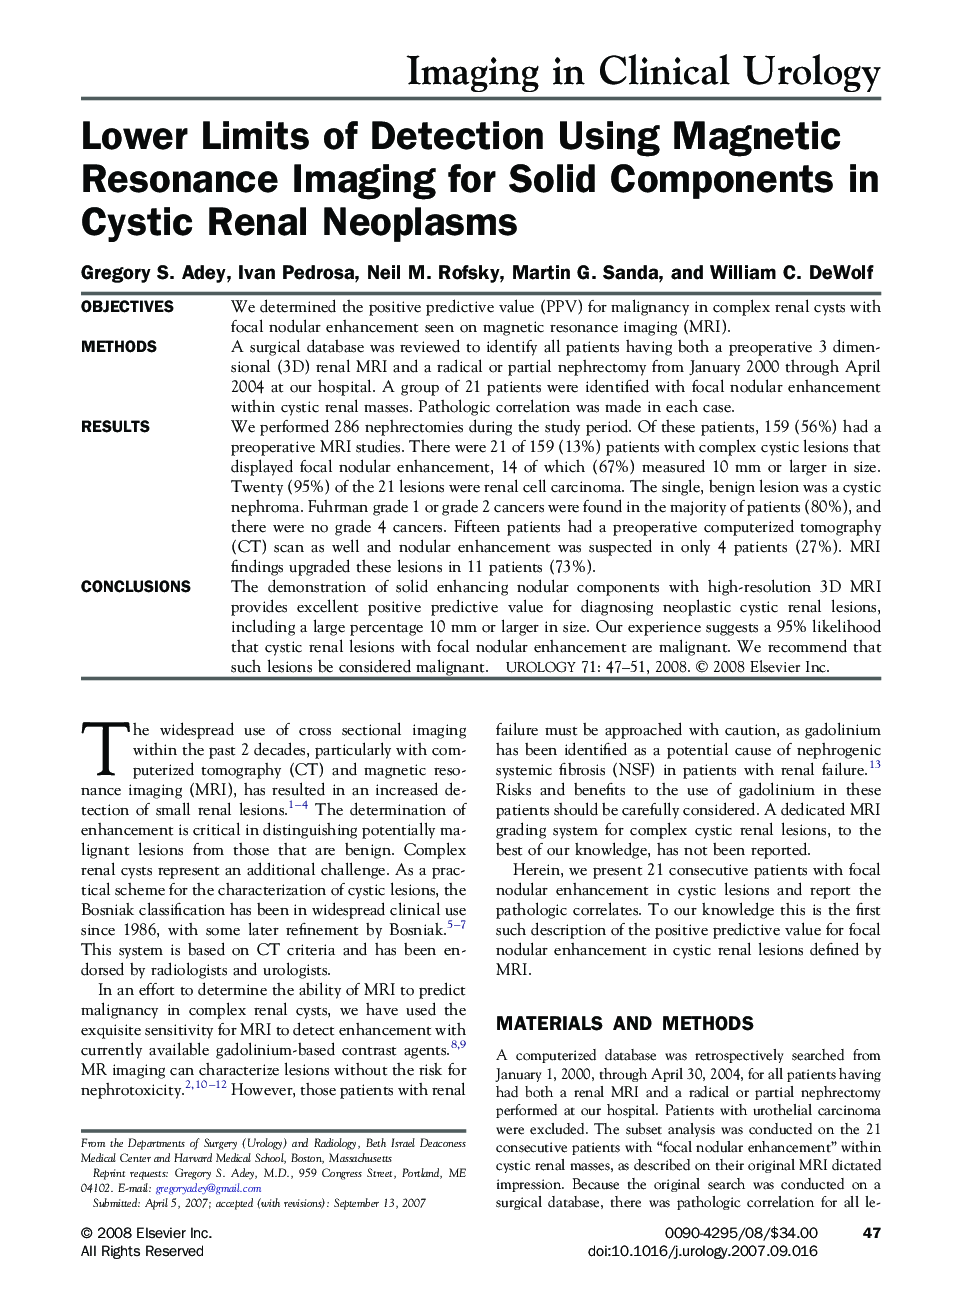 Lower Limits of Detection Using Magnetic Resonance Imaging for Solid Components in Cystic Renal Neoplasms